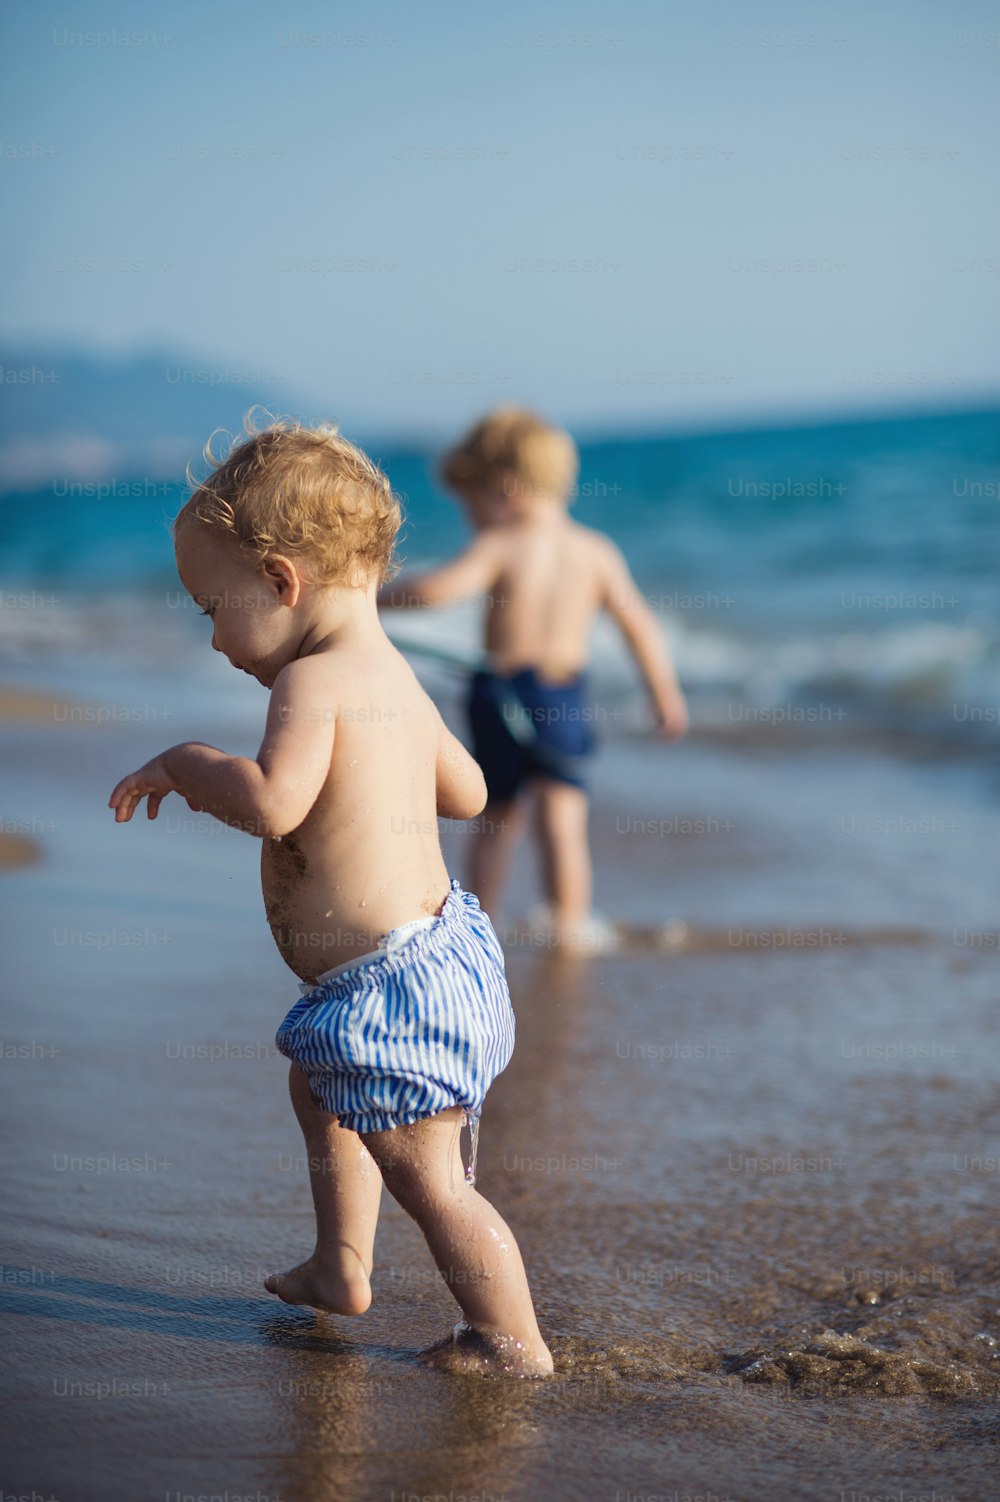 Two shirtless toddler children walking on a beach on summer holiday.